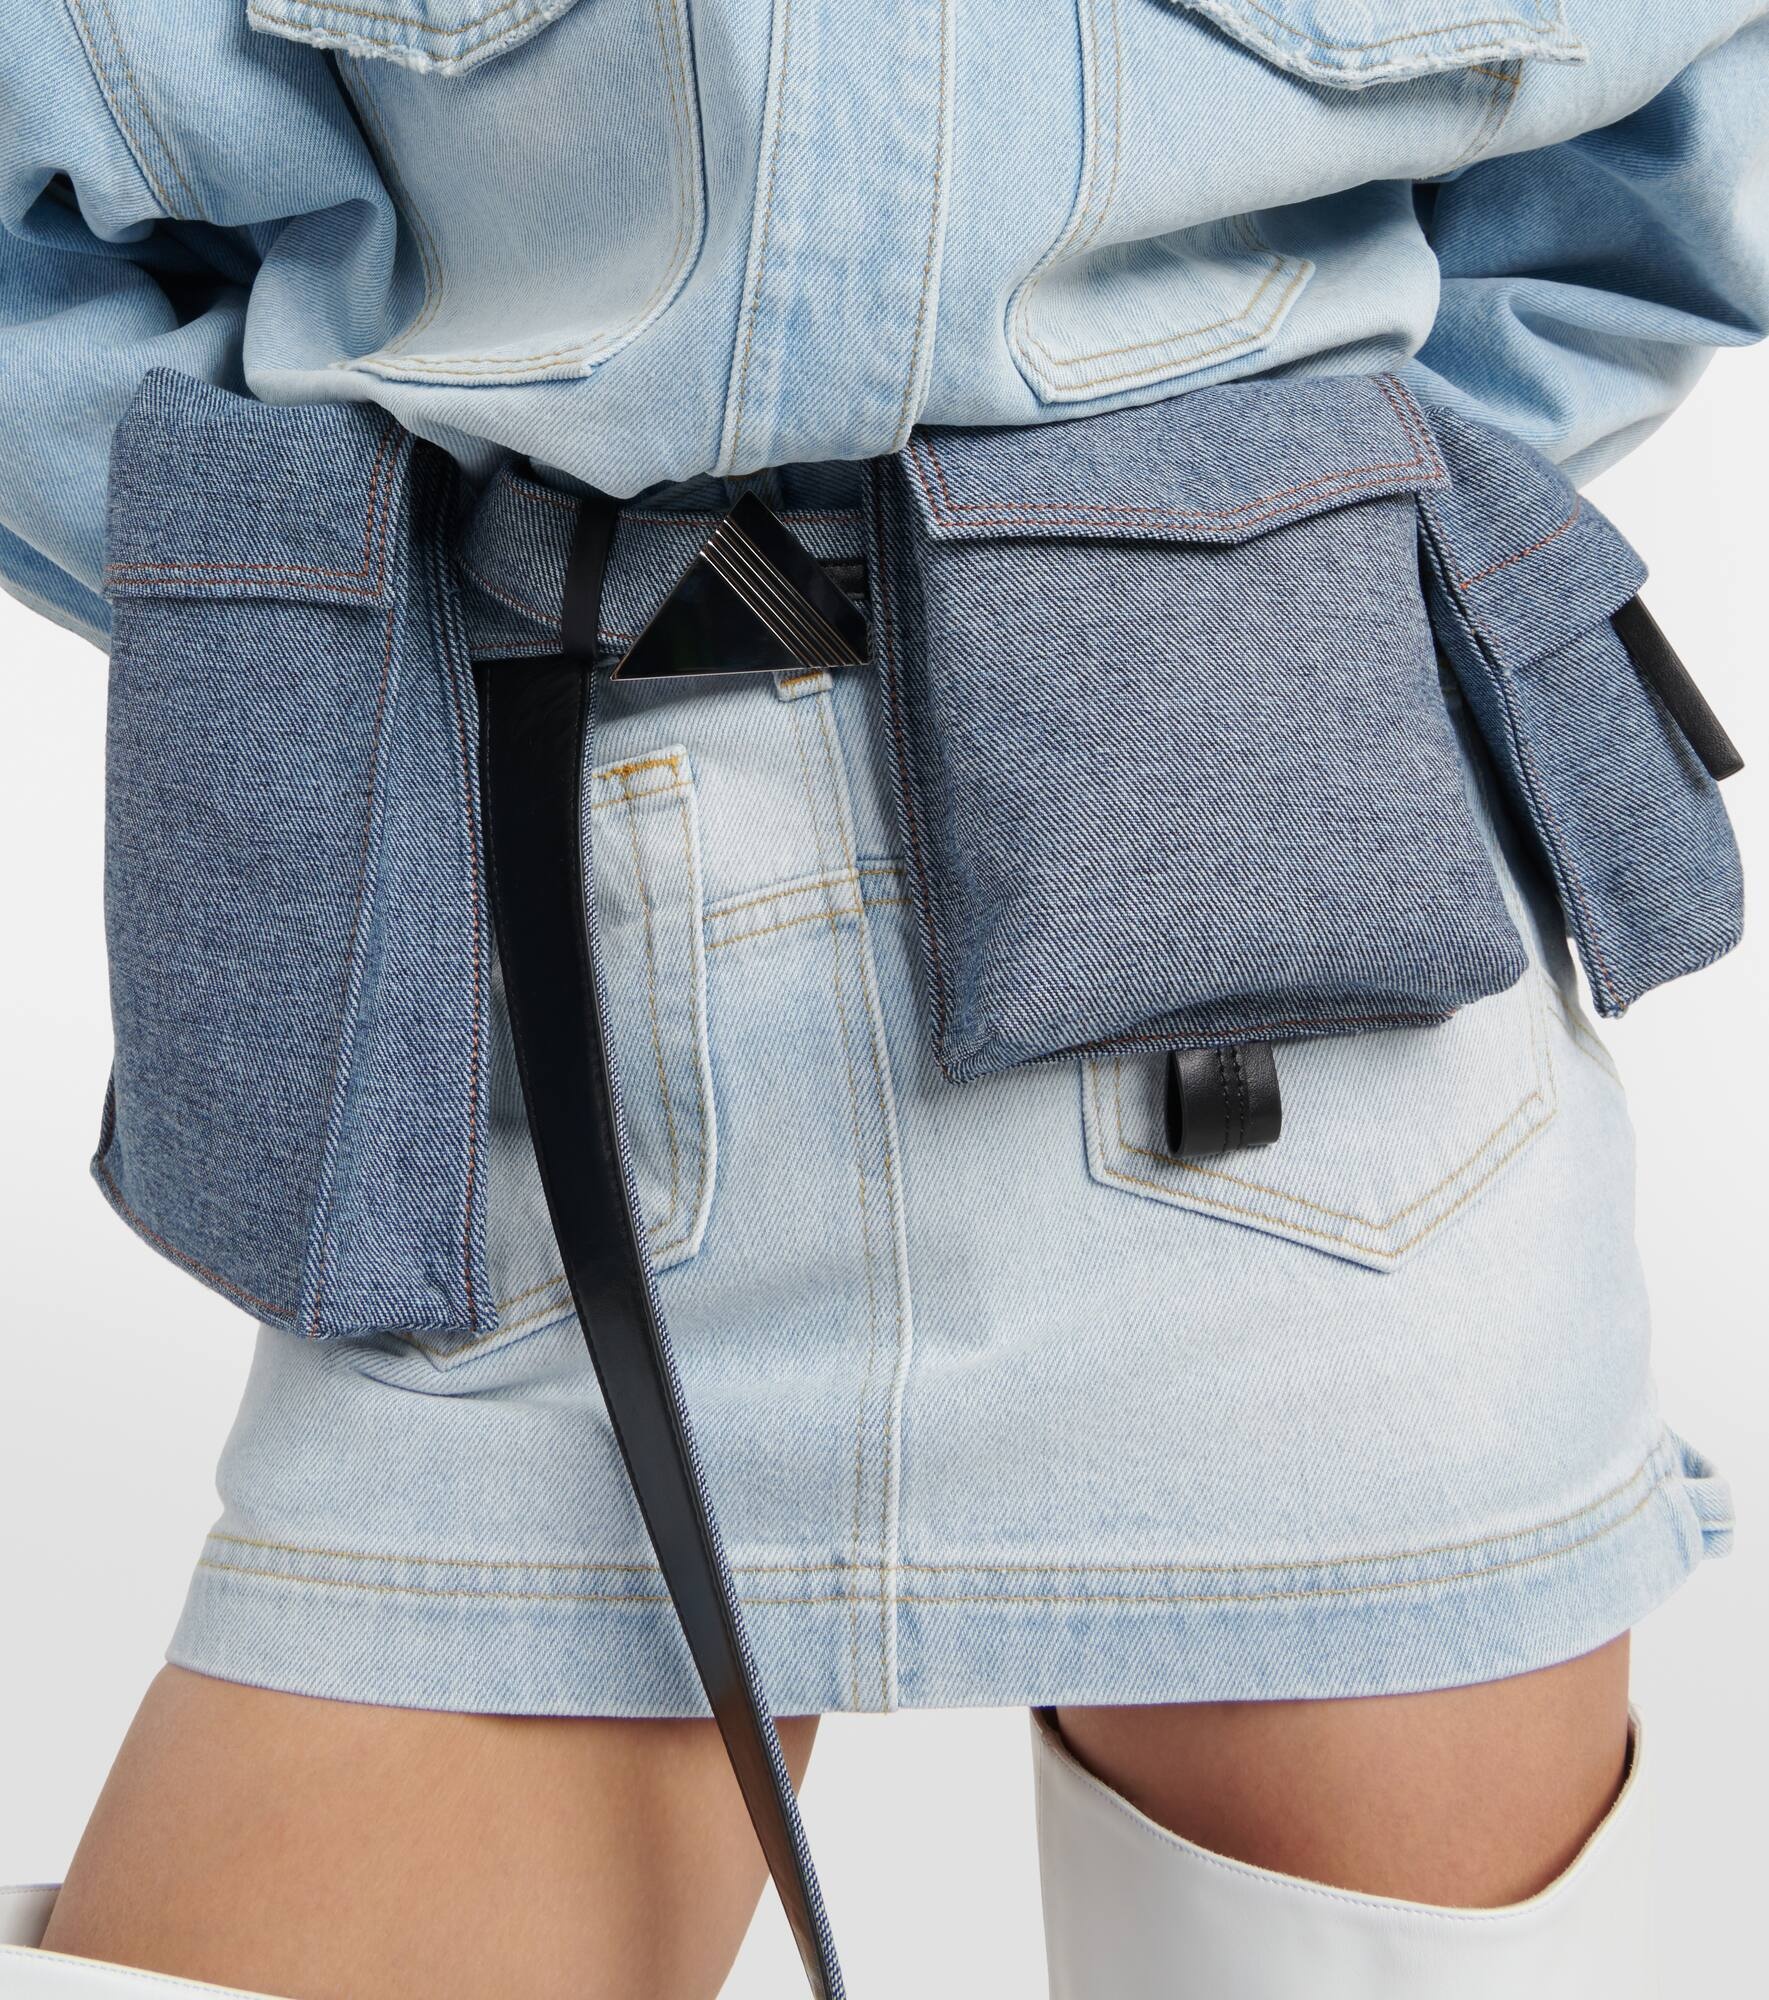 Denim and leather belt with pockets - 2